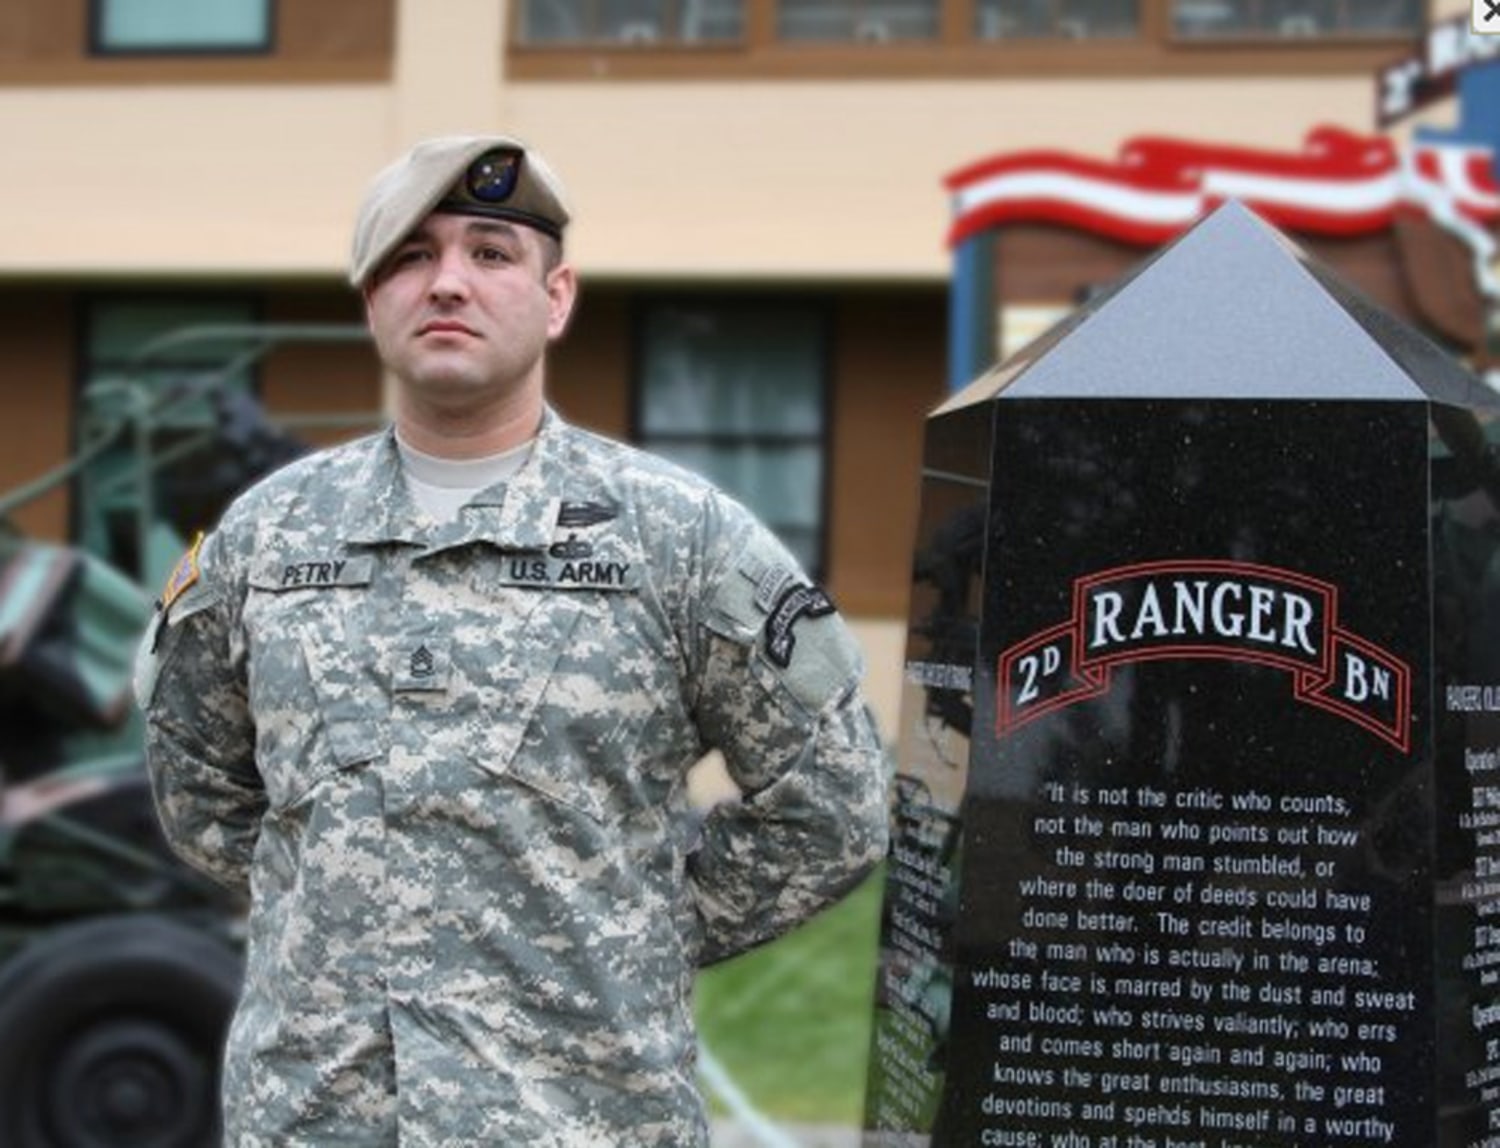 Army Ranger gets Medal of Honor for saving comrades in Afghanistan 